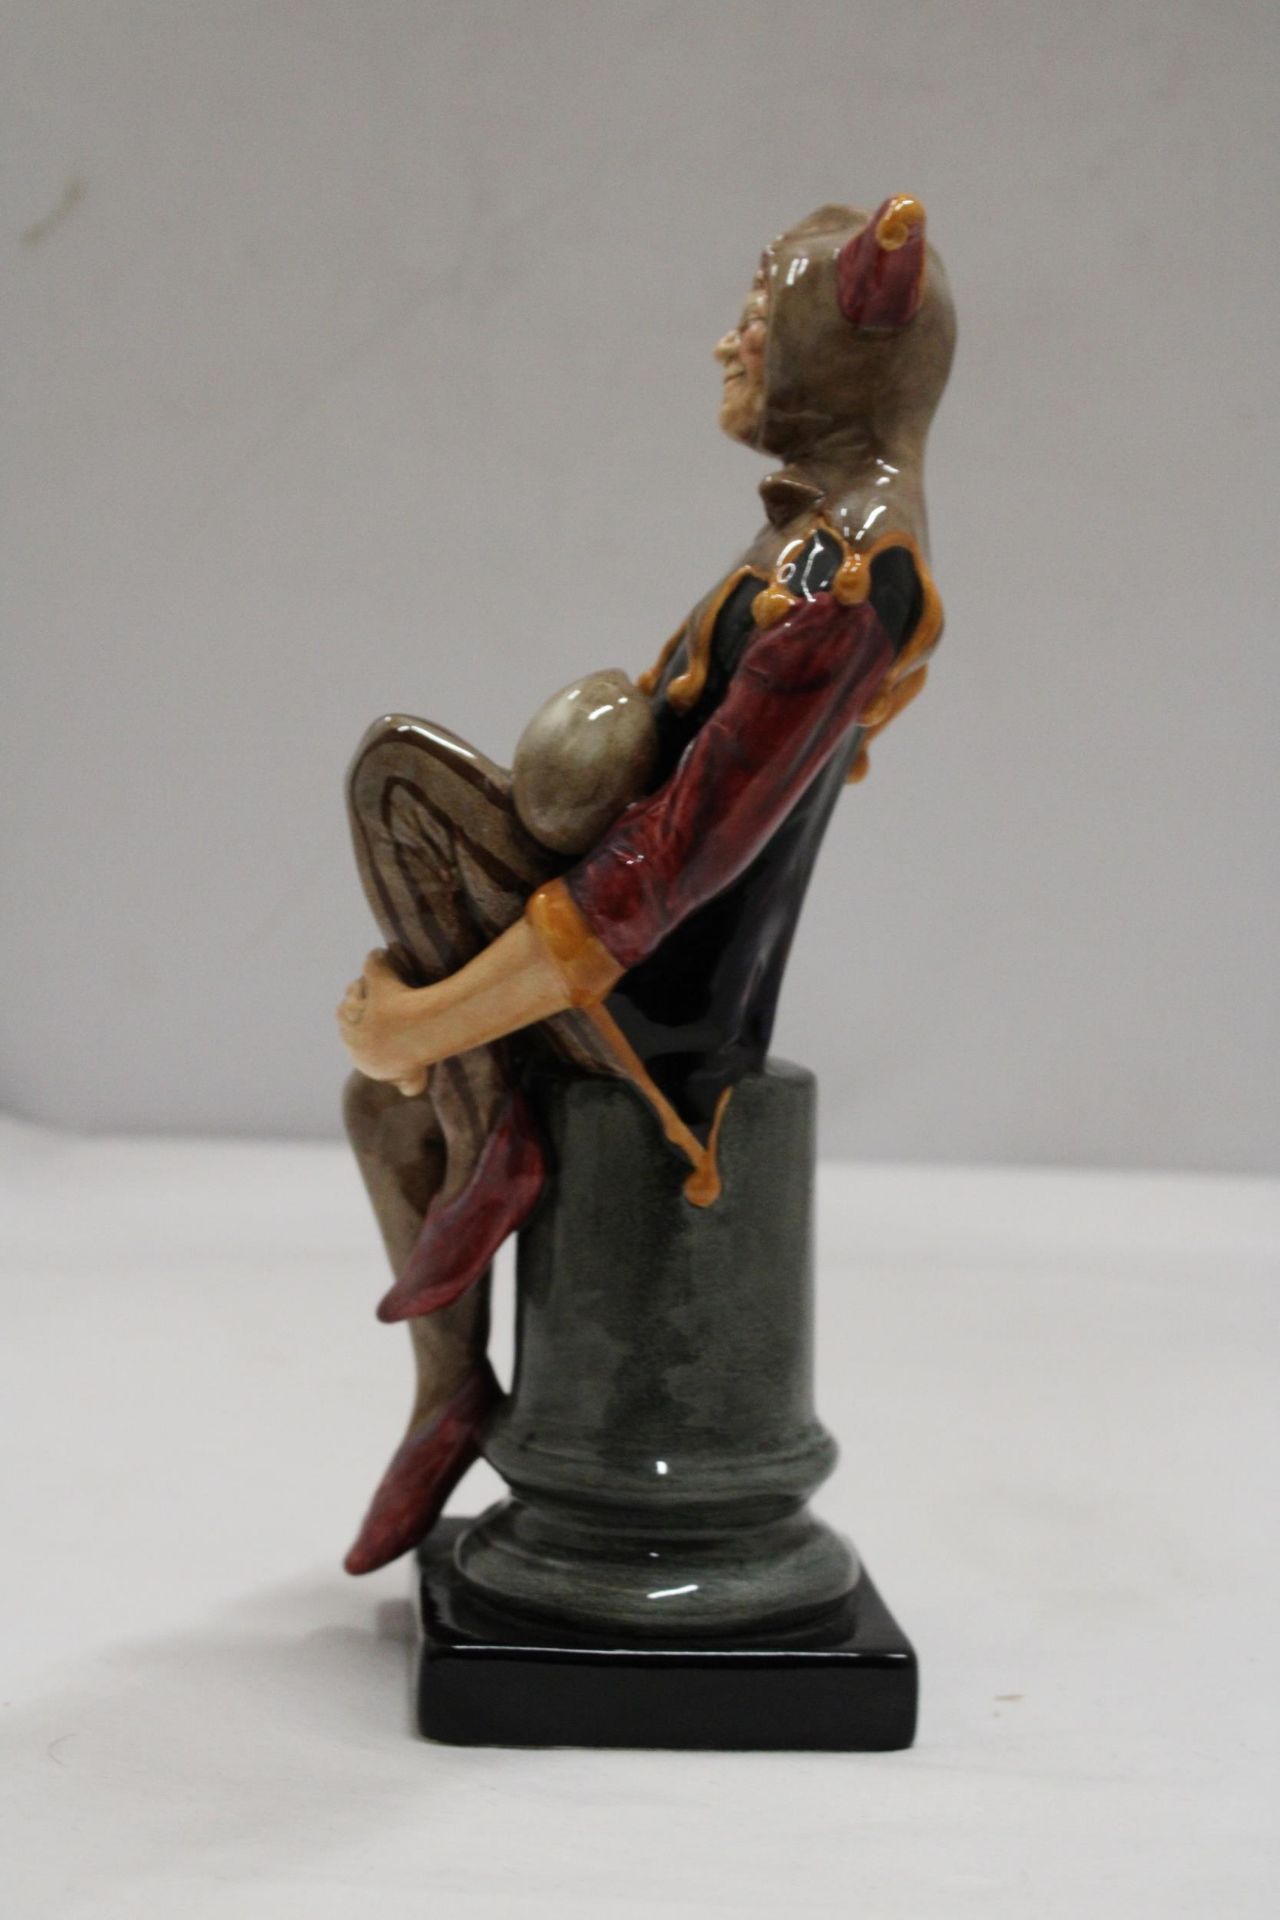 A ROYAL DOULTON FIGURE "THE JESTER" HN 2016 - Image 5 of 6